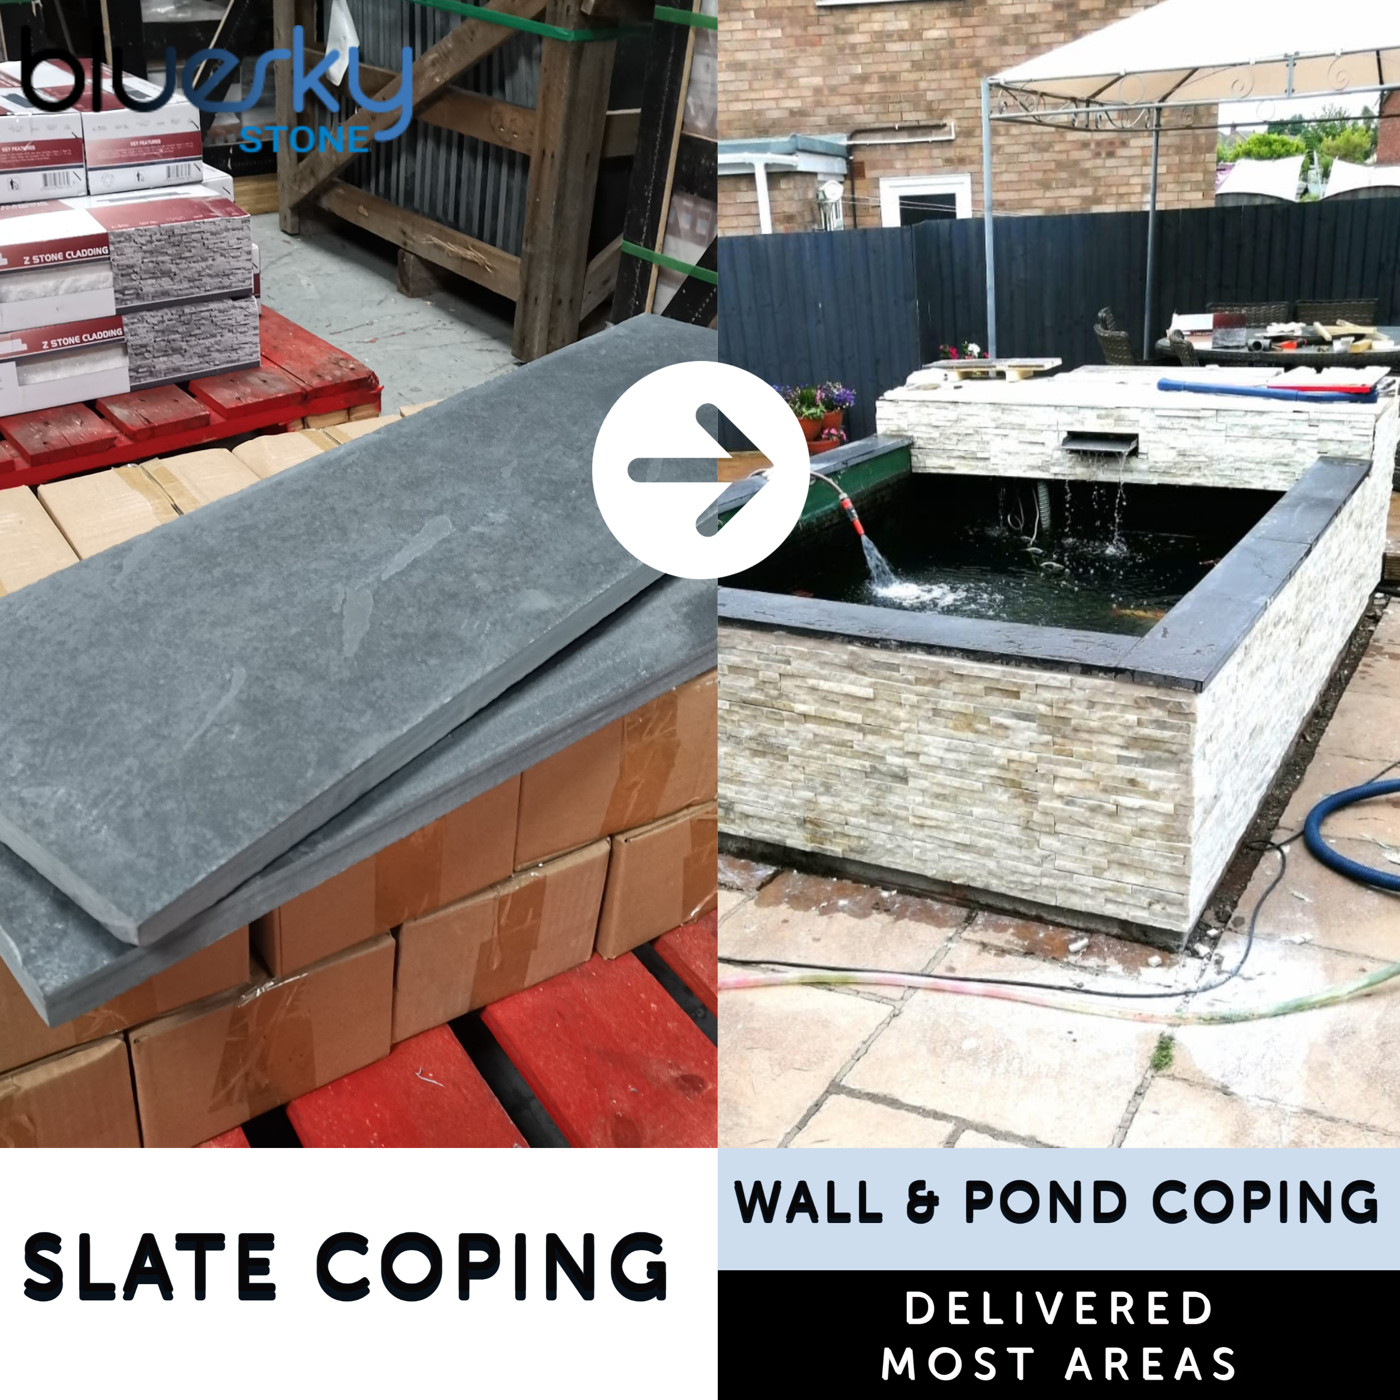 Black Slate 800 x 250 x 20 mm | Bluesky Stone  | Coping stone  used in Koi Pond project 